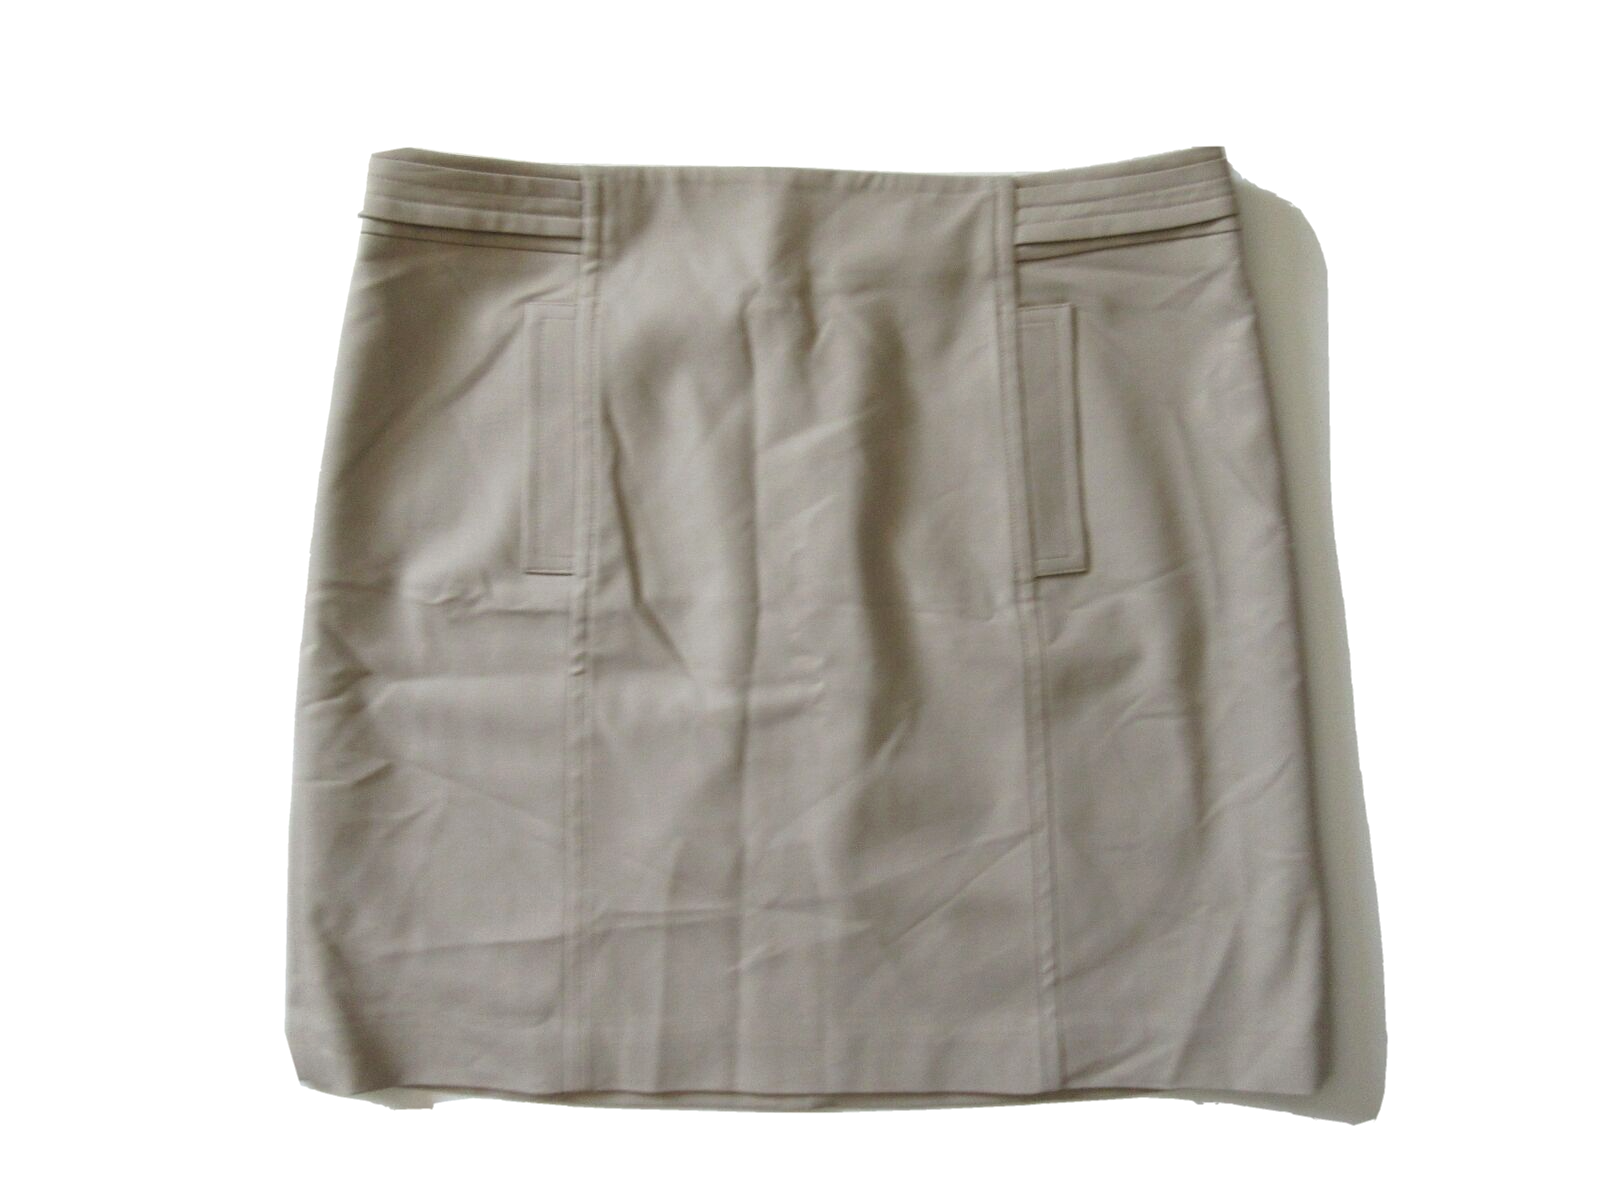 Primary image for NWT Ann Taylor Compact Doubleweave in Cashew Beige Stretch Cotton Skirt 14